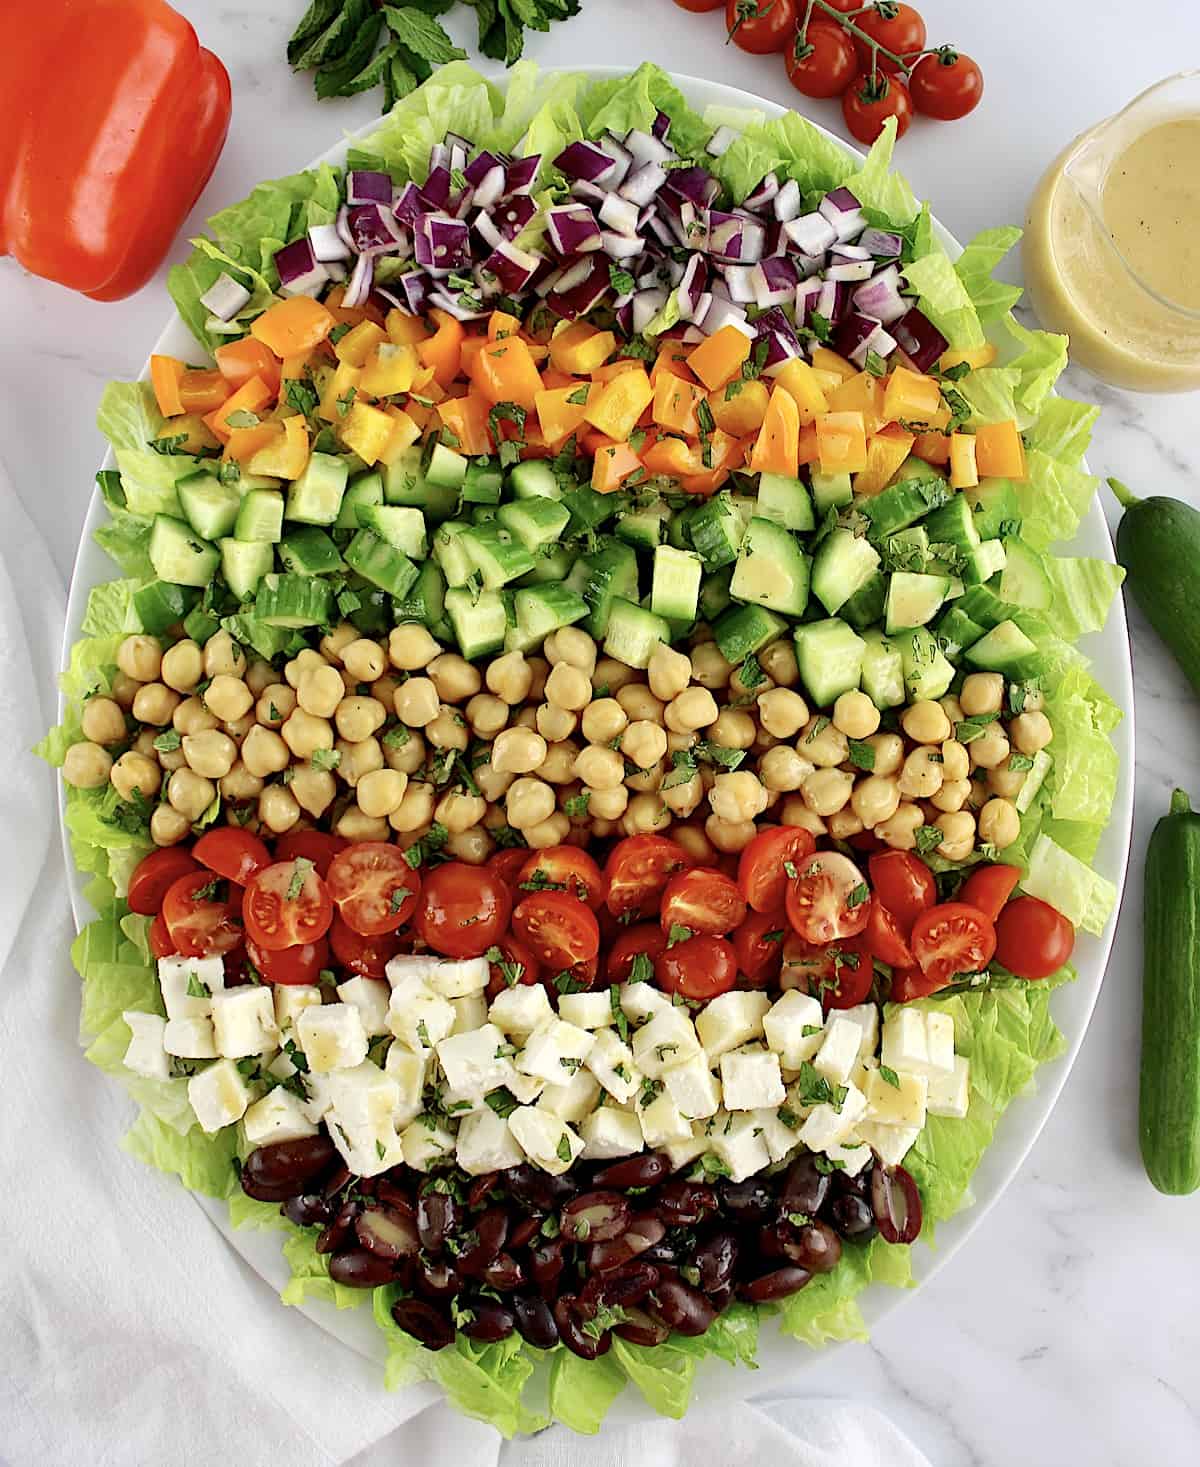 Mediterranean Chopped Salad in white oval platter with veggies arranged in rows